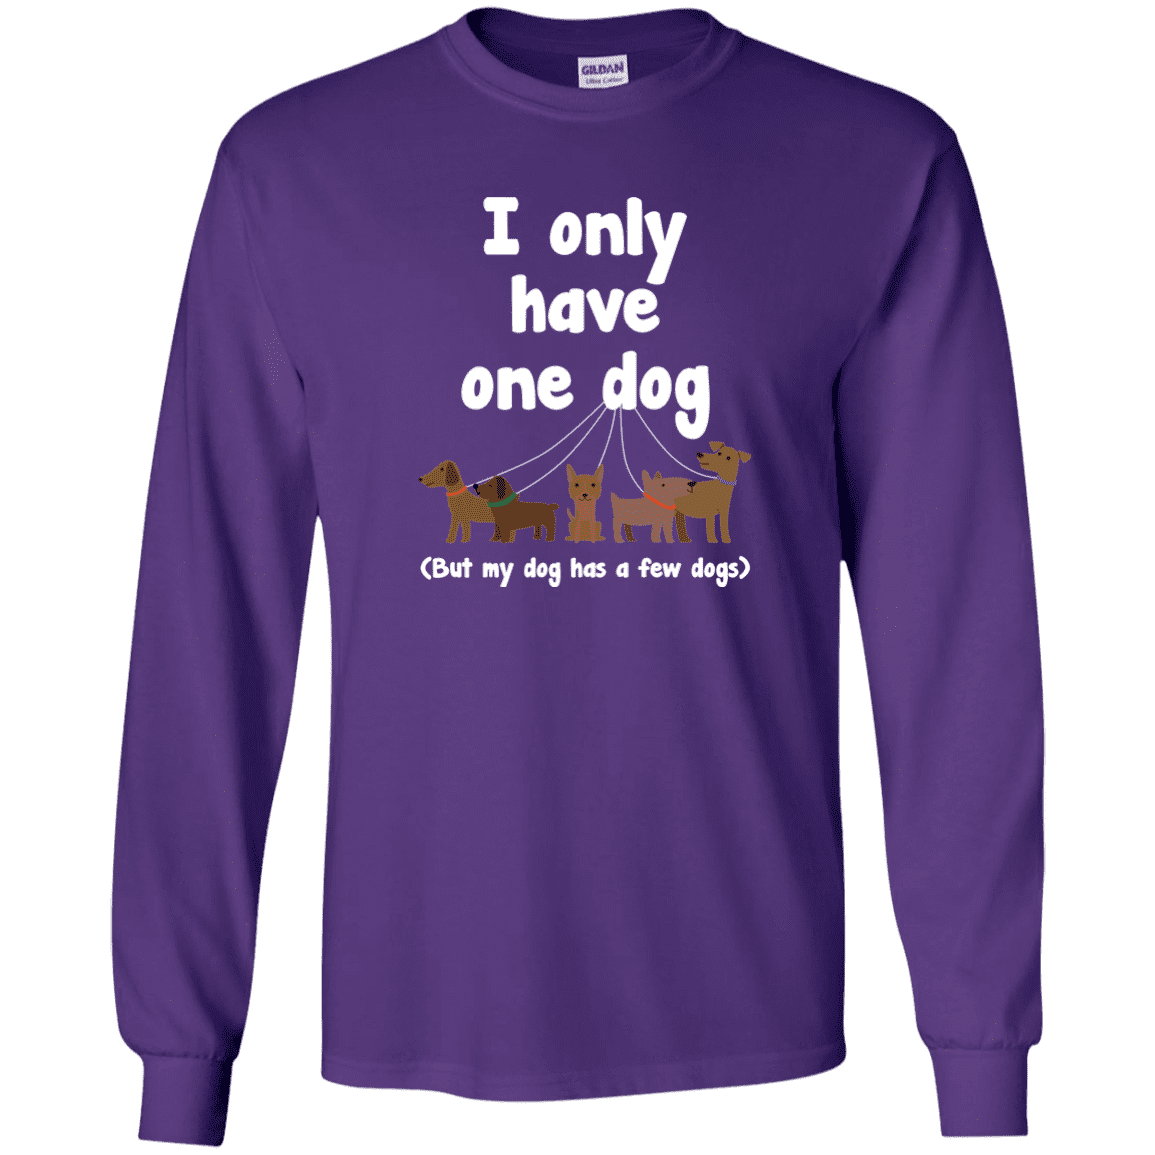 I Only Have 1 Dog - Long Sleeve T Shirt.